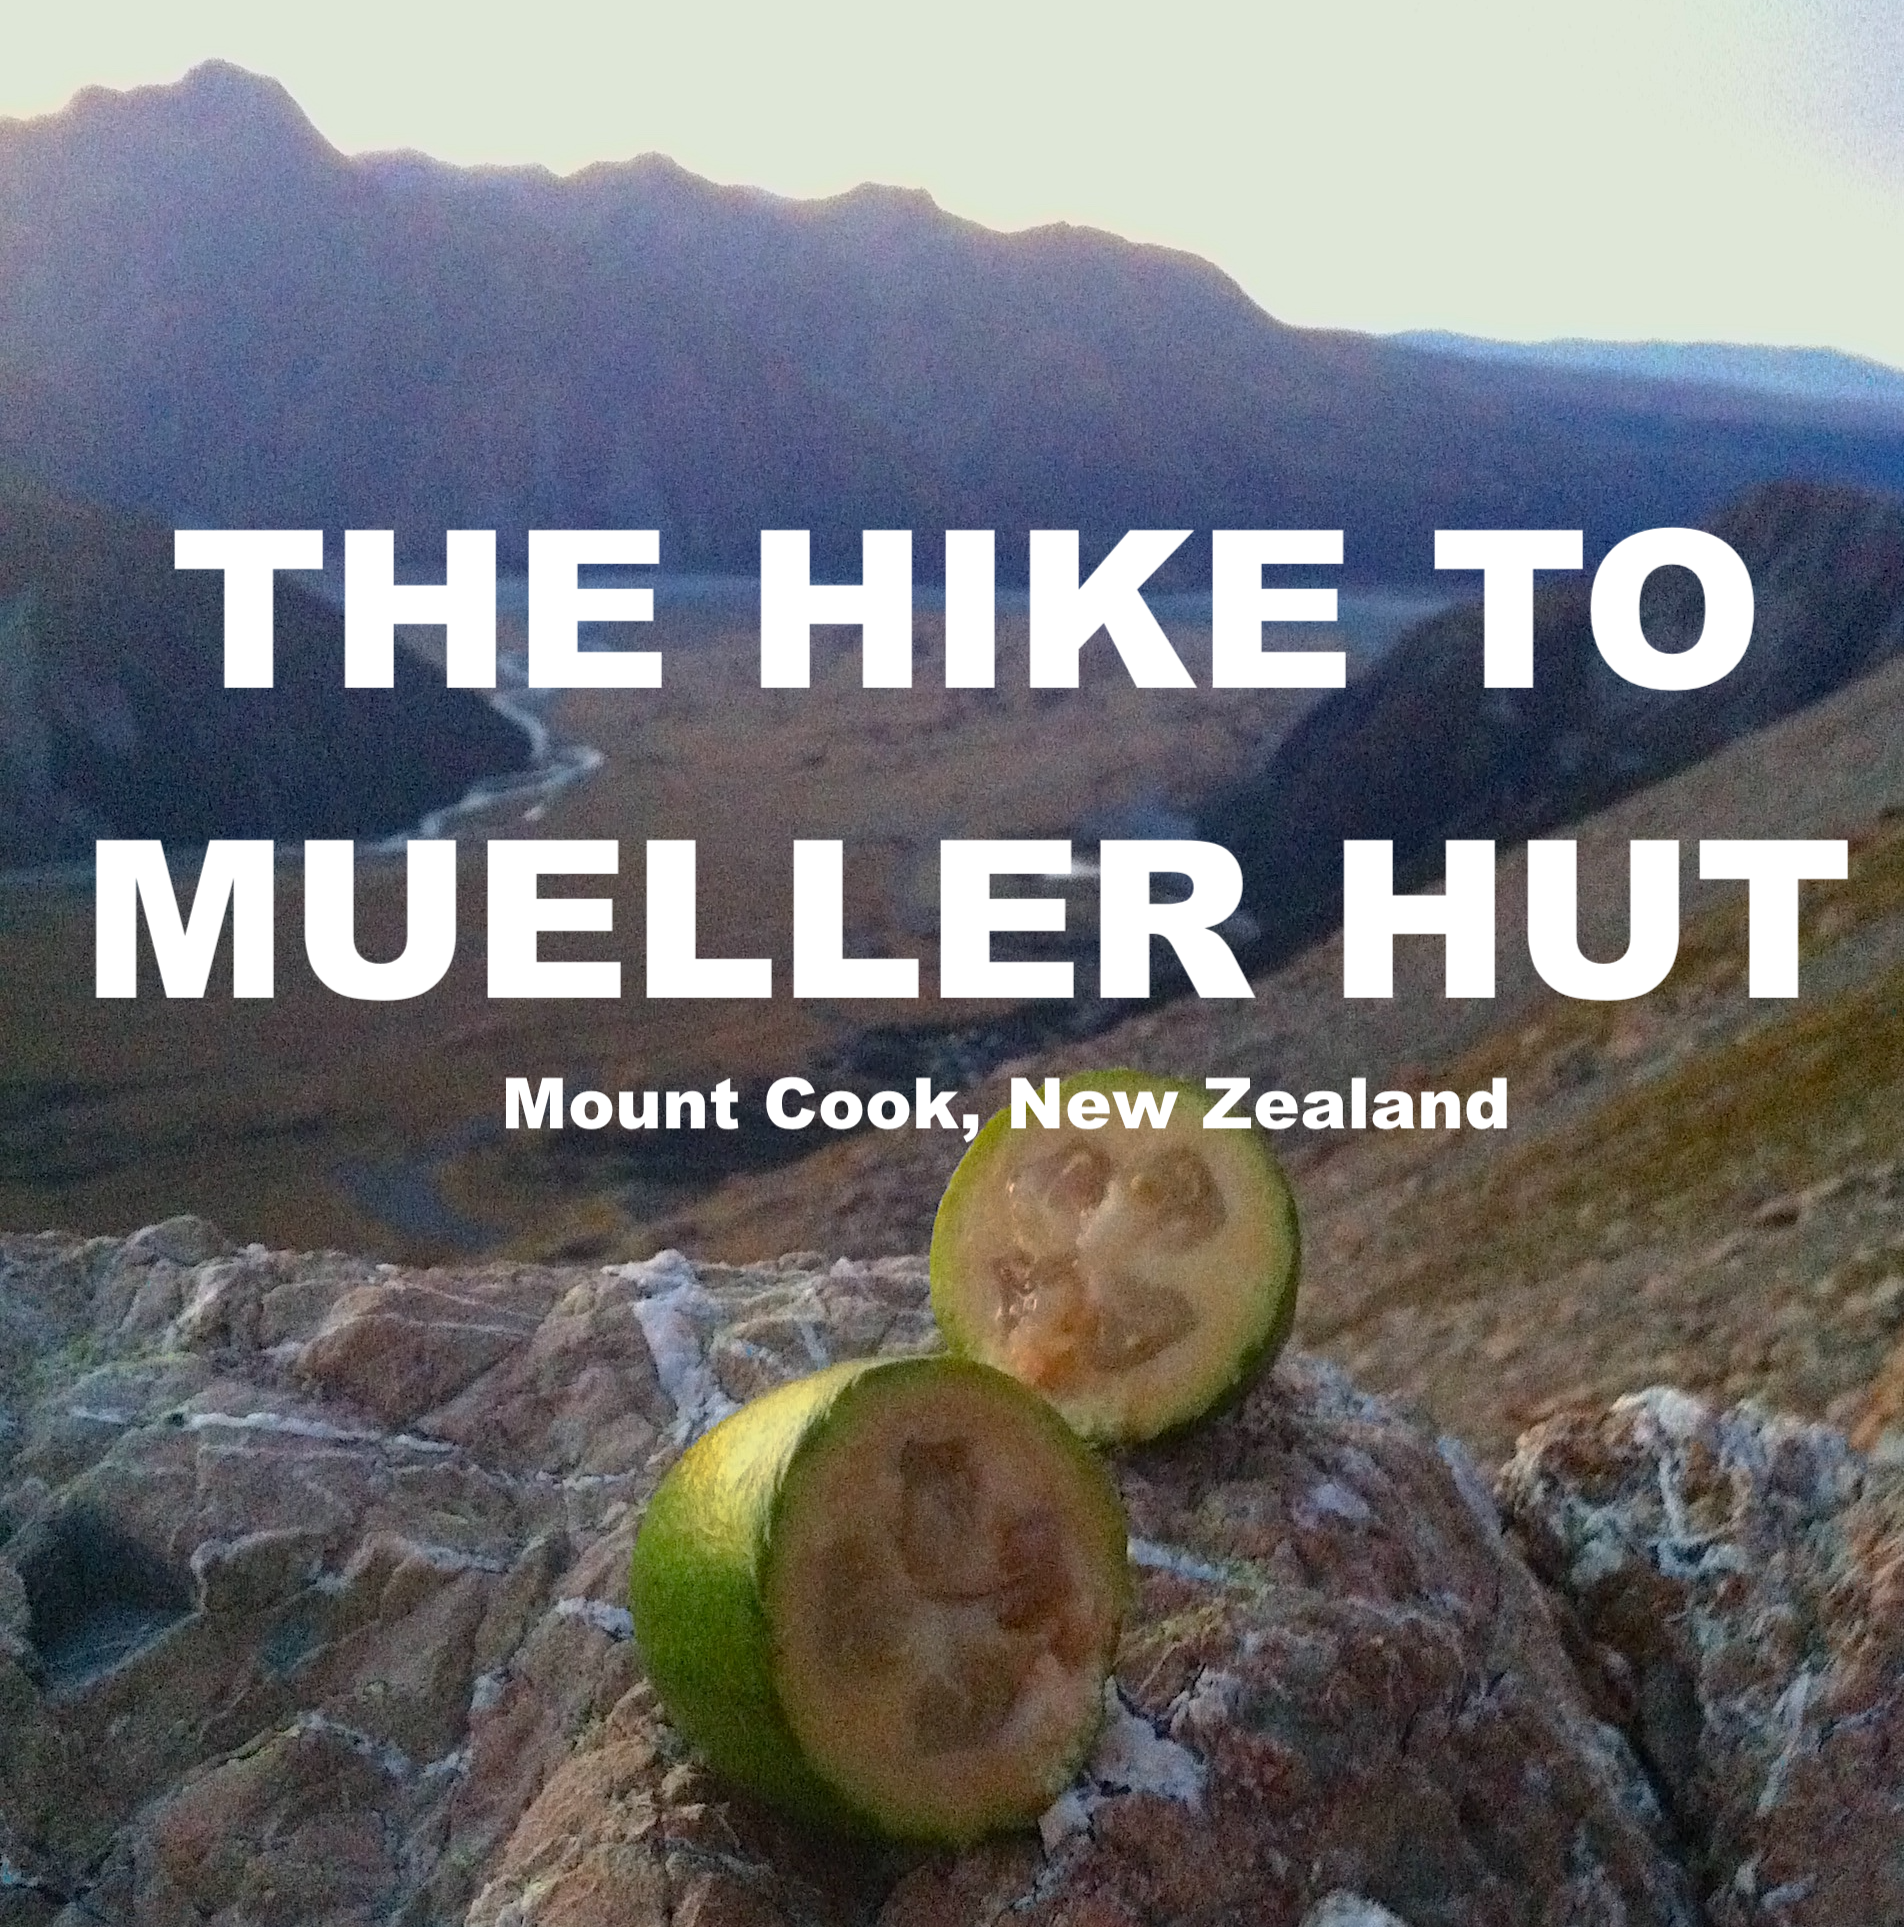 The Hike to Mueller Hut